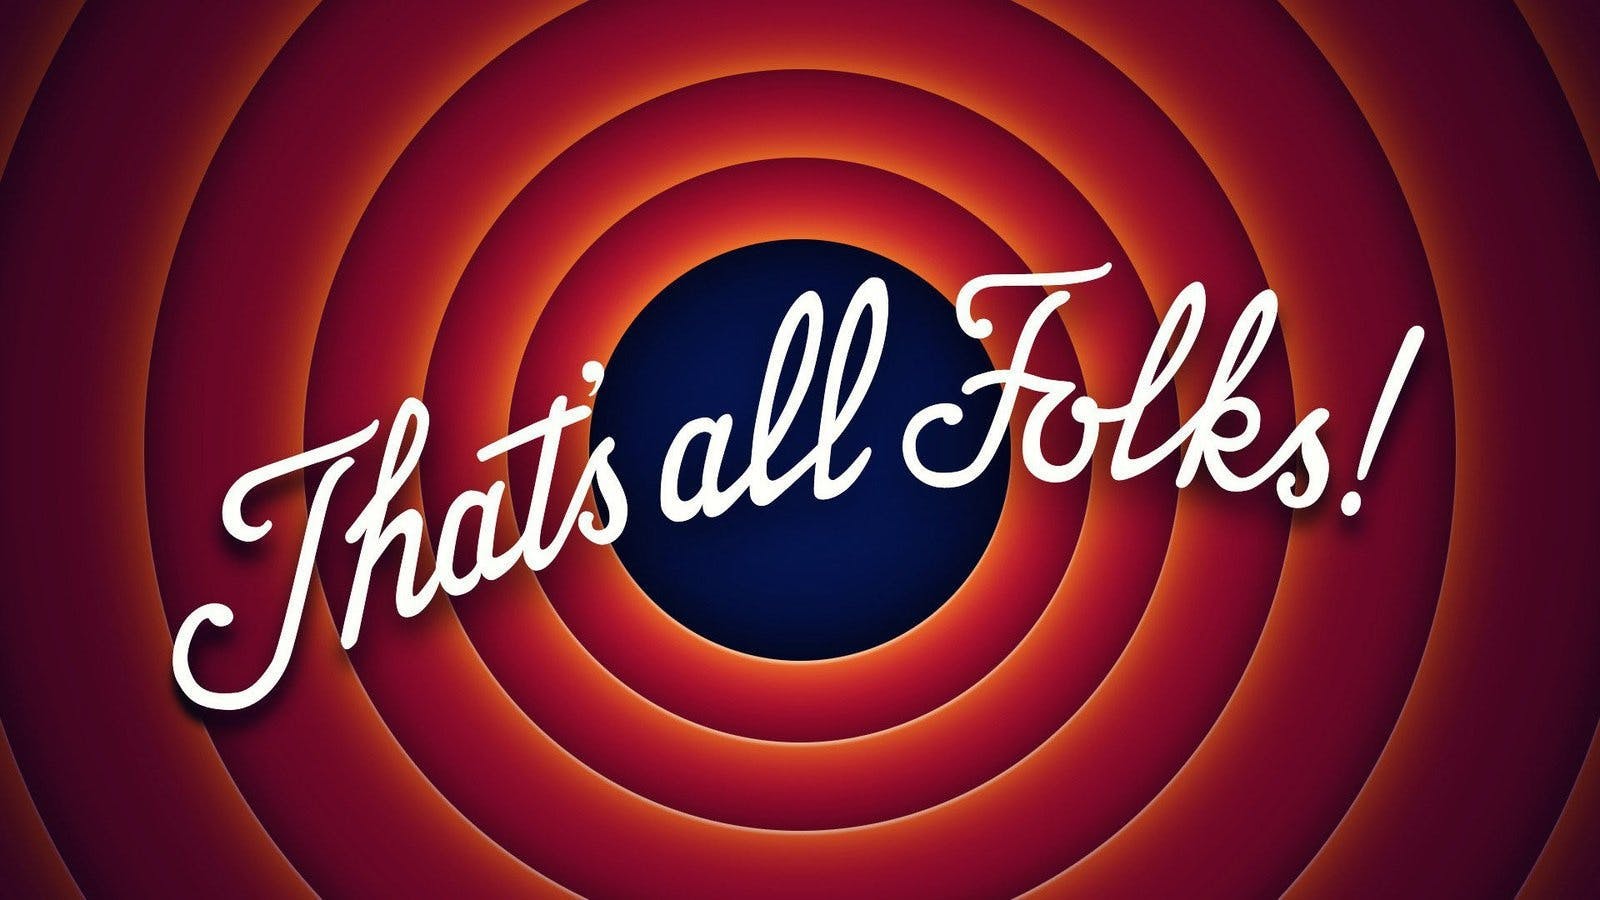 That's all folks!